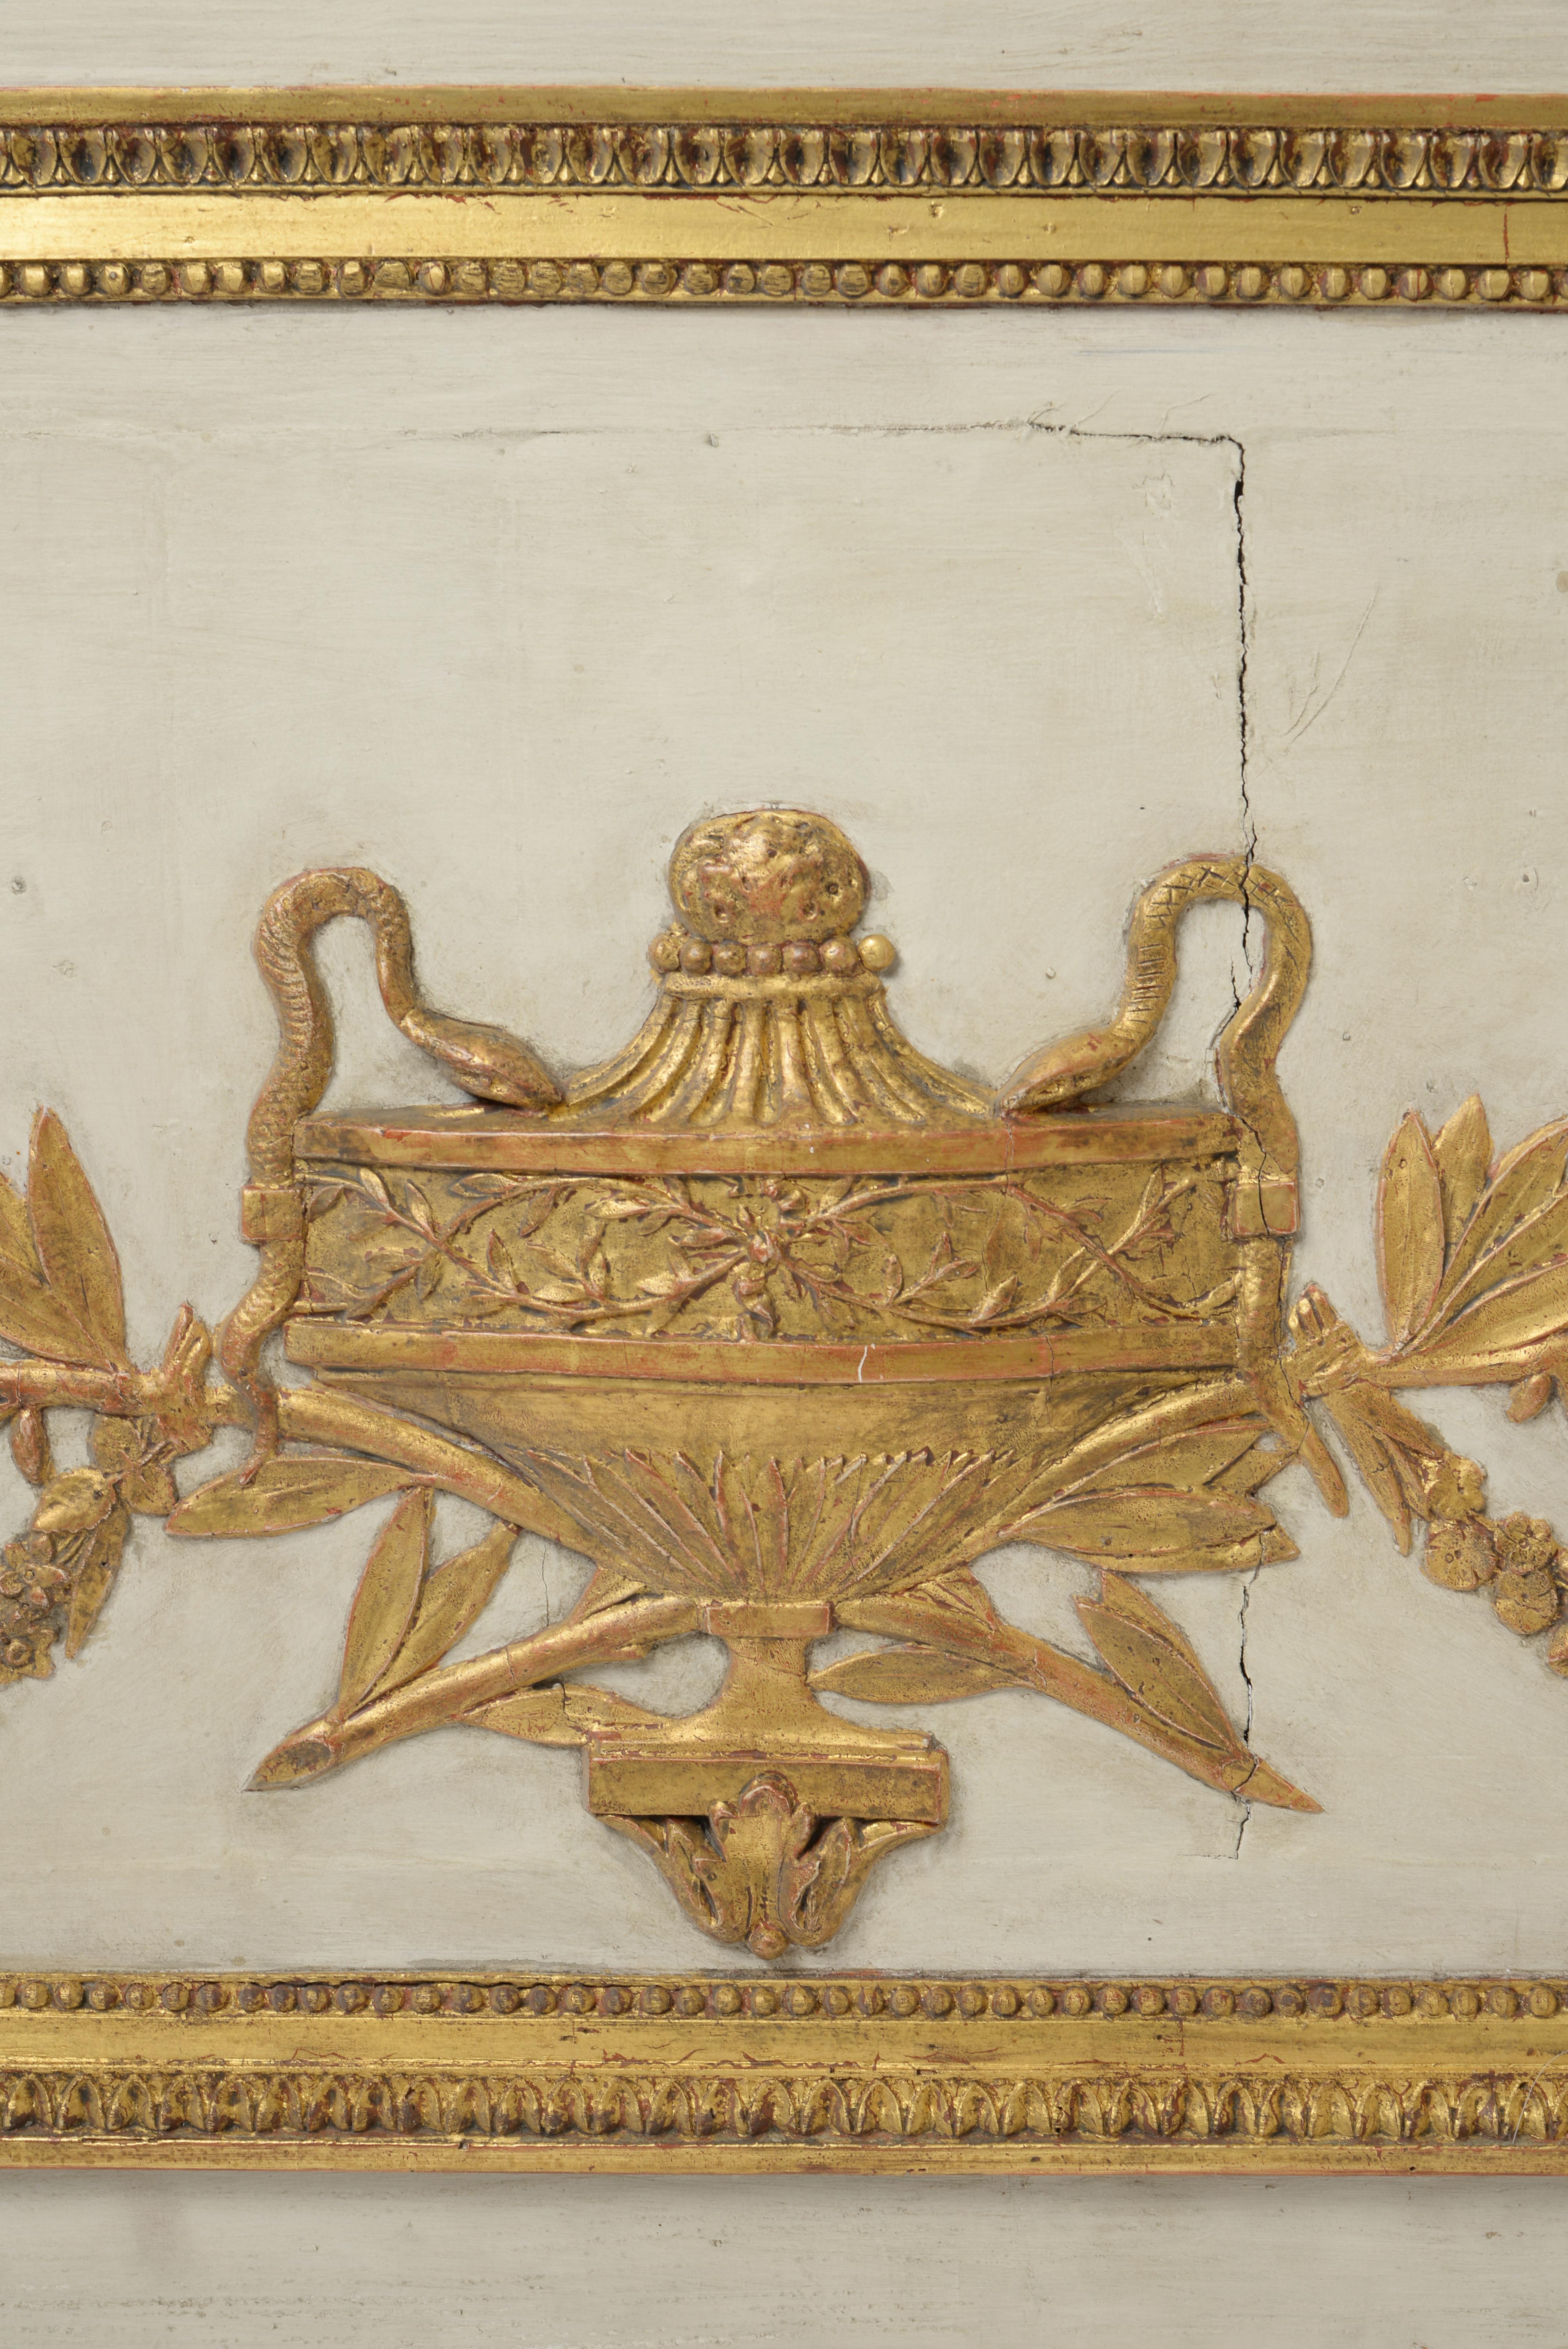 These stunning overdoors feature beautifully crafted gilded ornaments showing an amphora ranked with leaves. The central image is surrounded by an elaborate gilded border creating balance and structure. The beautifully painted panels serve as a